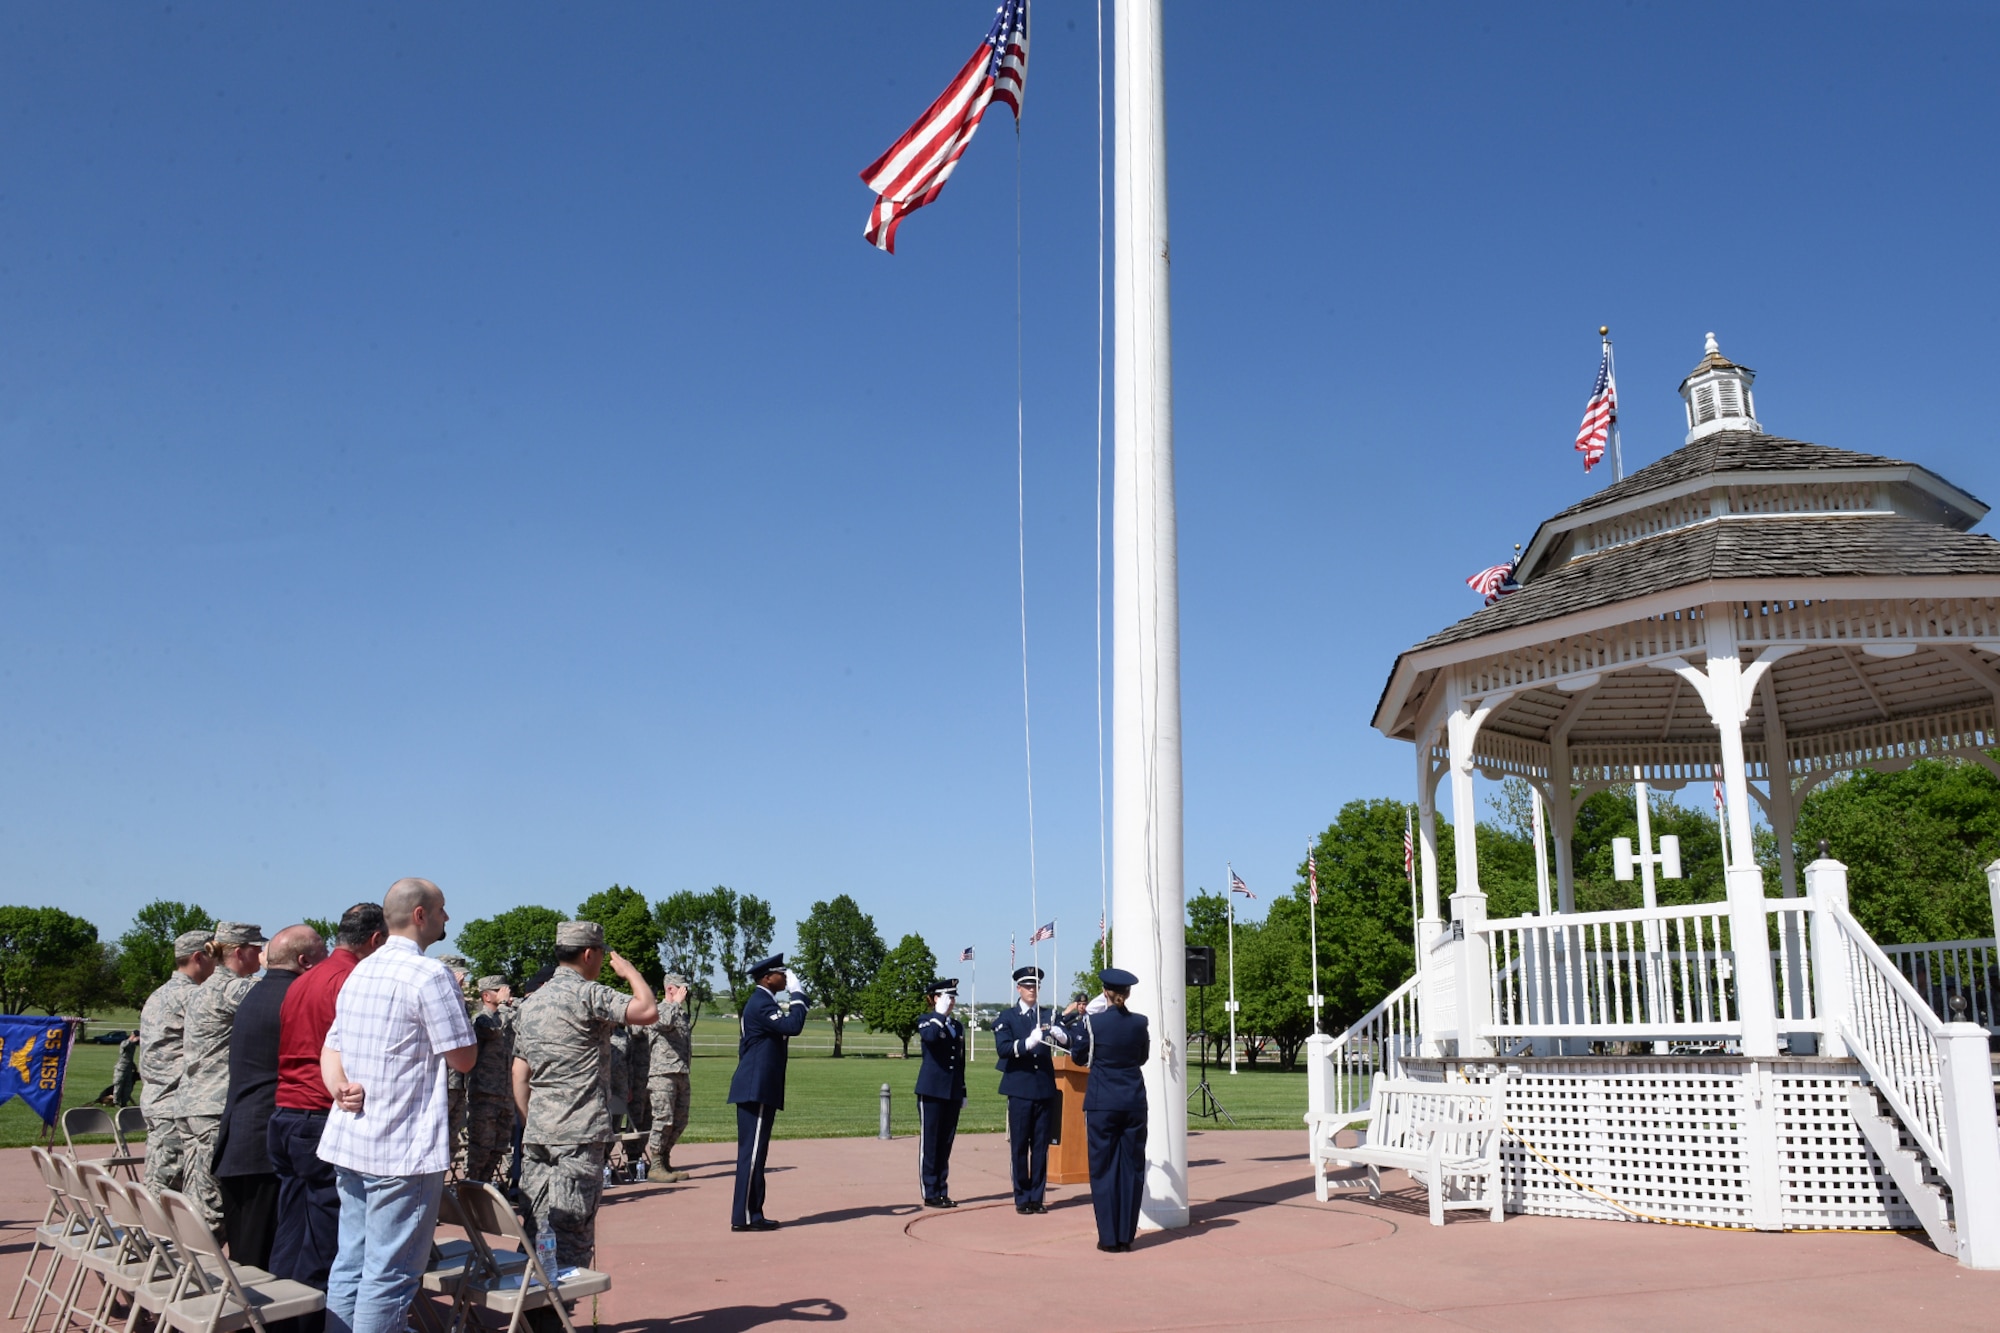 Offutt Air Force Base Honor Guard lower the U.S. flag during a retreat ceremony honoring Police Week May 17, 2018, at Offutt Air Force Base, Nebraska. Offutt’s defenders participated in local events as well as coordinating base events to recognize the contributions of police across the nation. (U.S. Air Force photo by Charles J. Haymond)